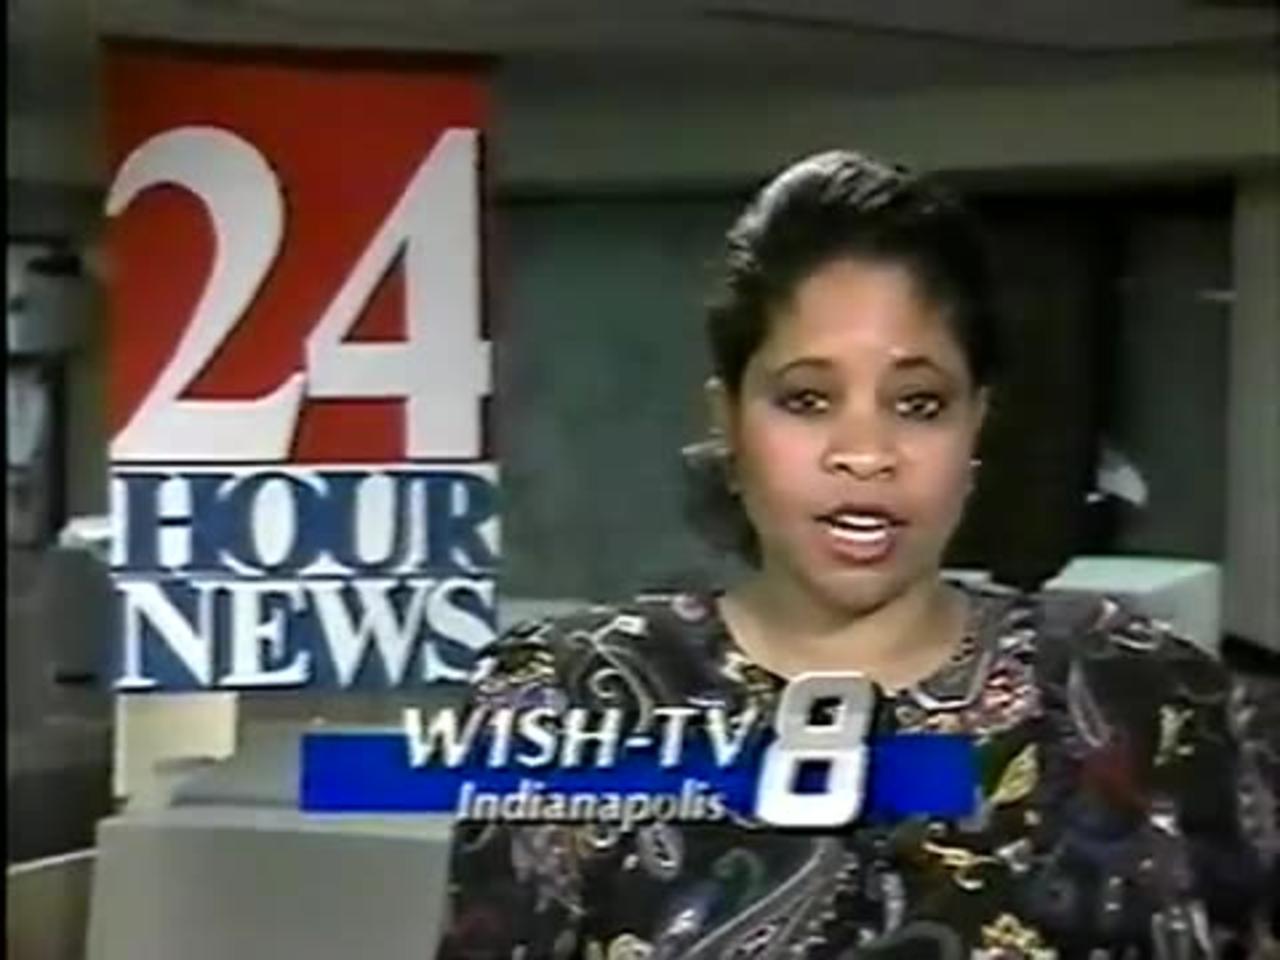 February 3, 1991 - Tina Cosby WISH Indianapolis News Update